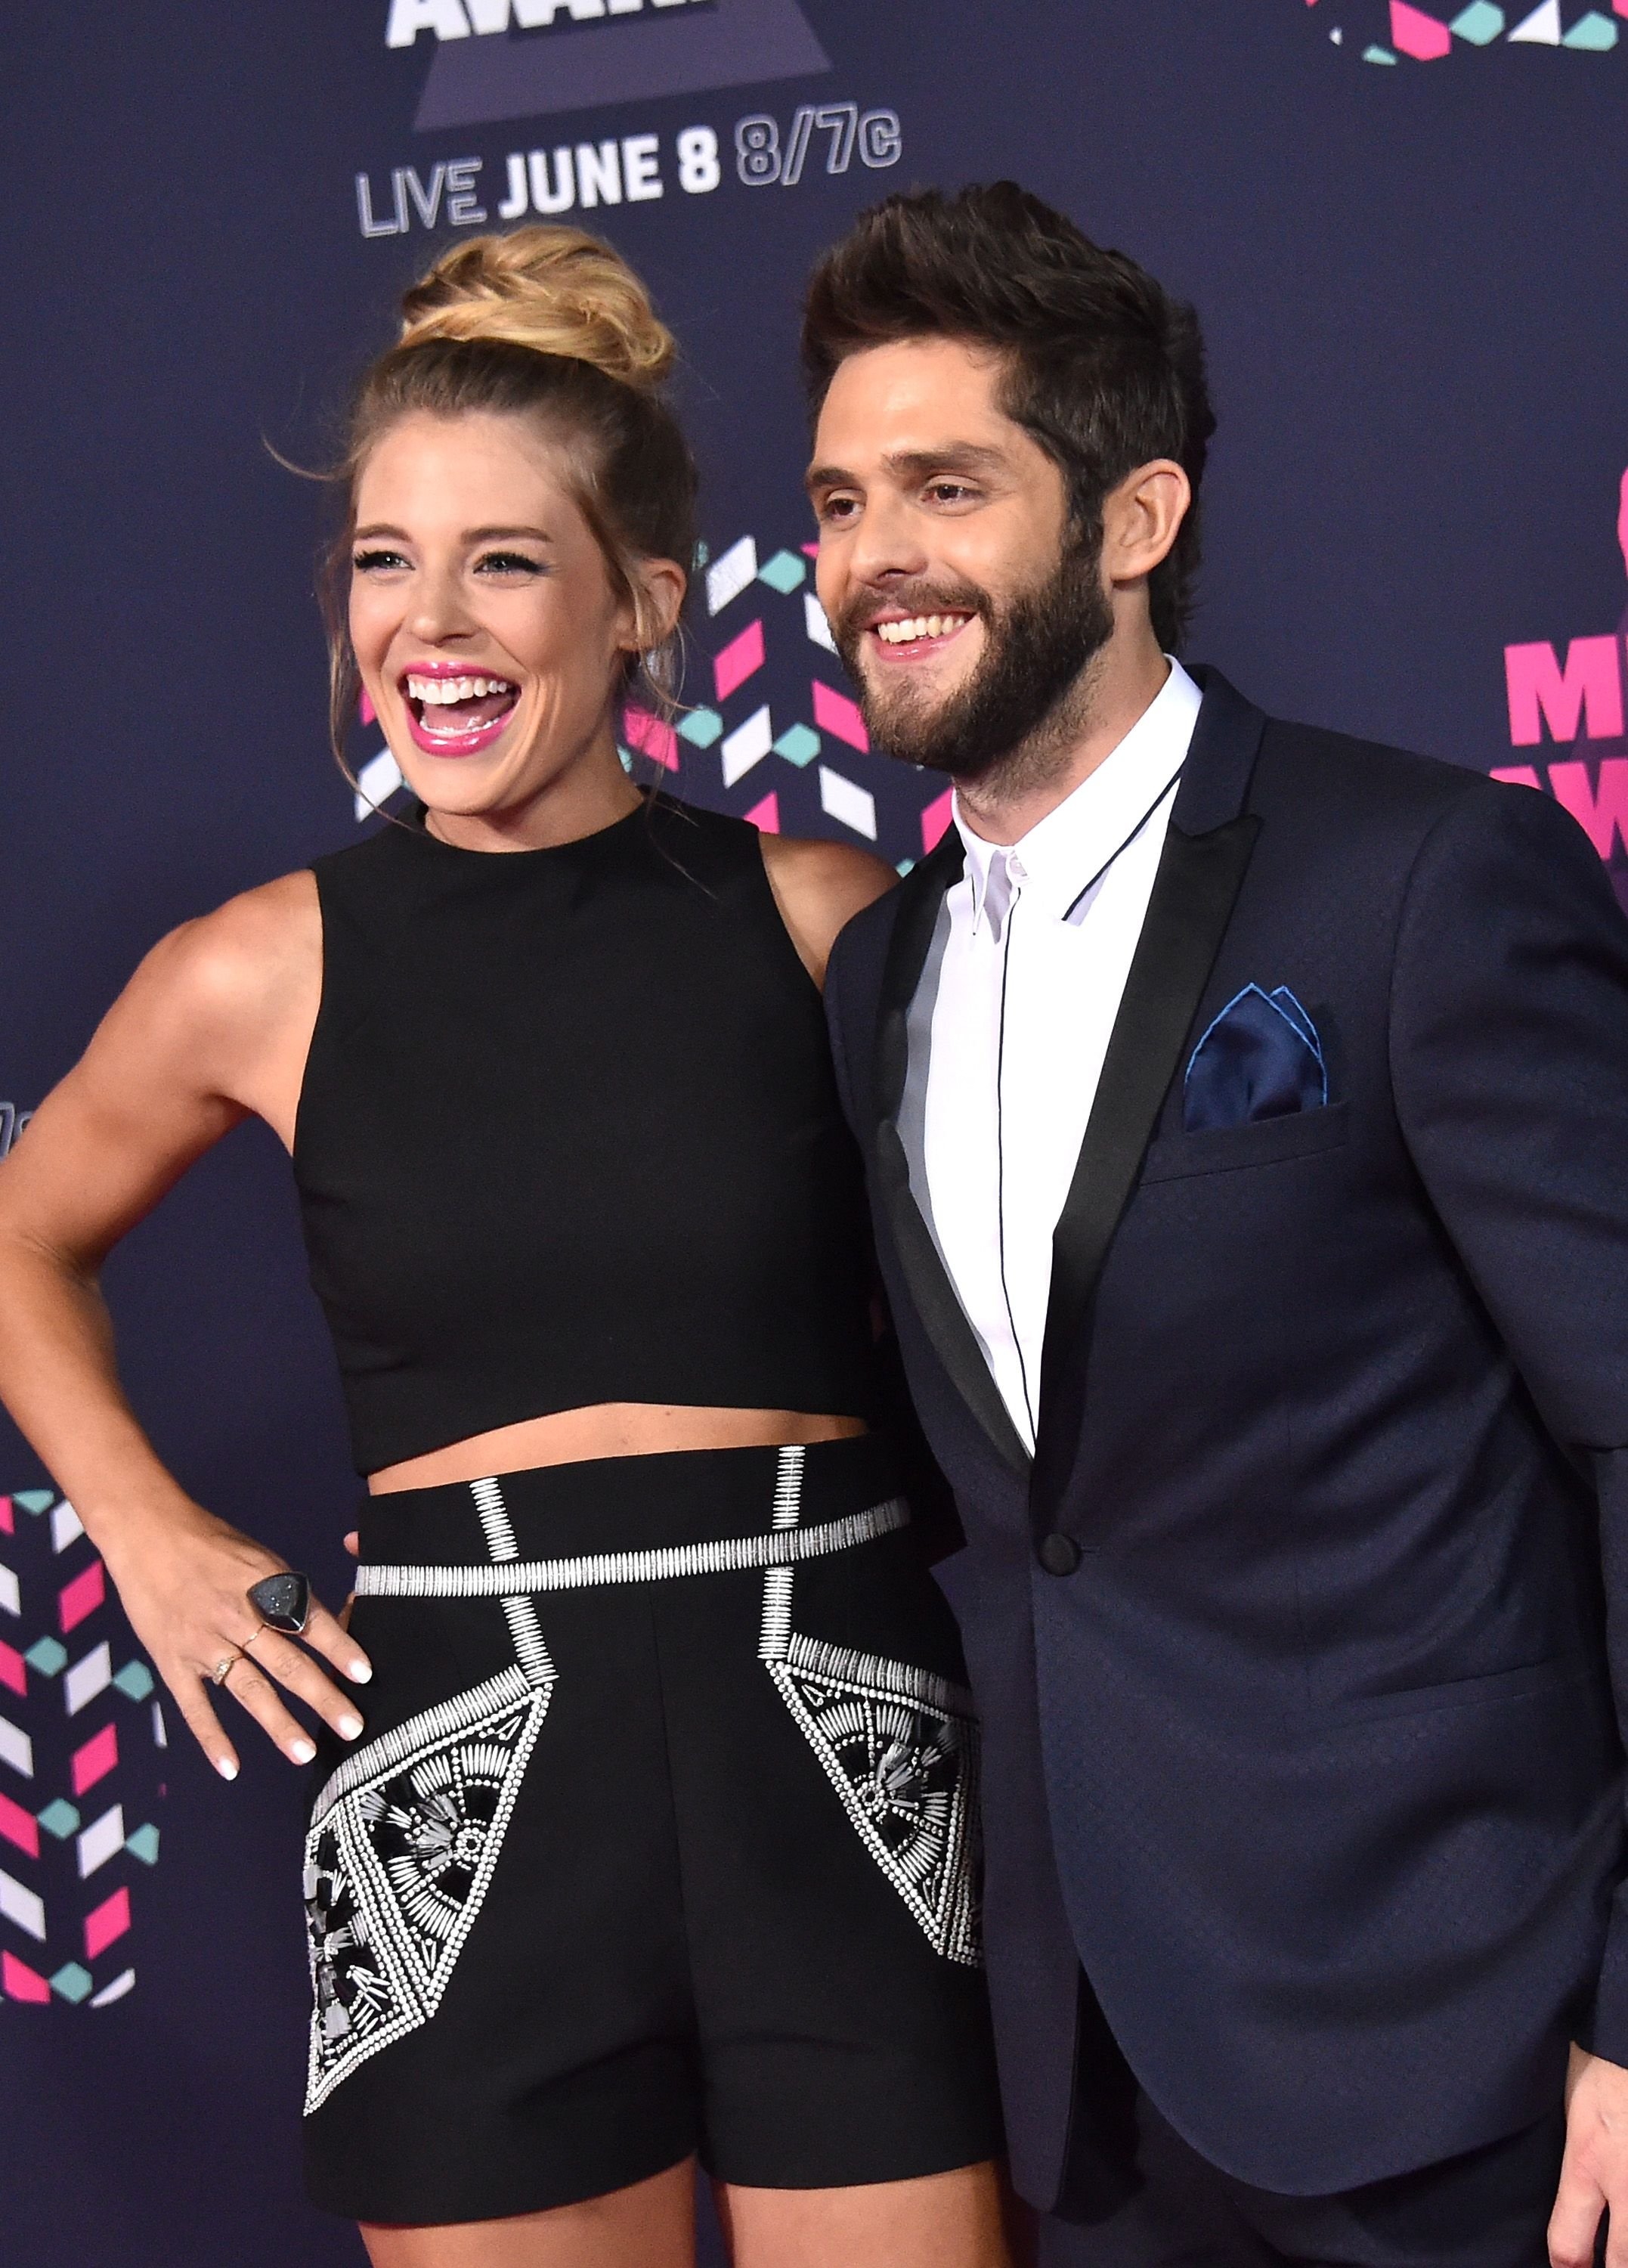 Thomas Rhett and wife Lauren Akins at the CMT Music Awards on June 8, 2016, in Nashville, Tennessee. | Photo: Getty Images